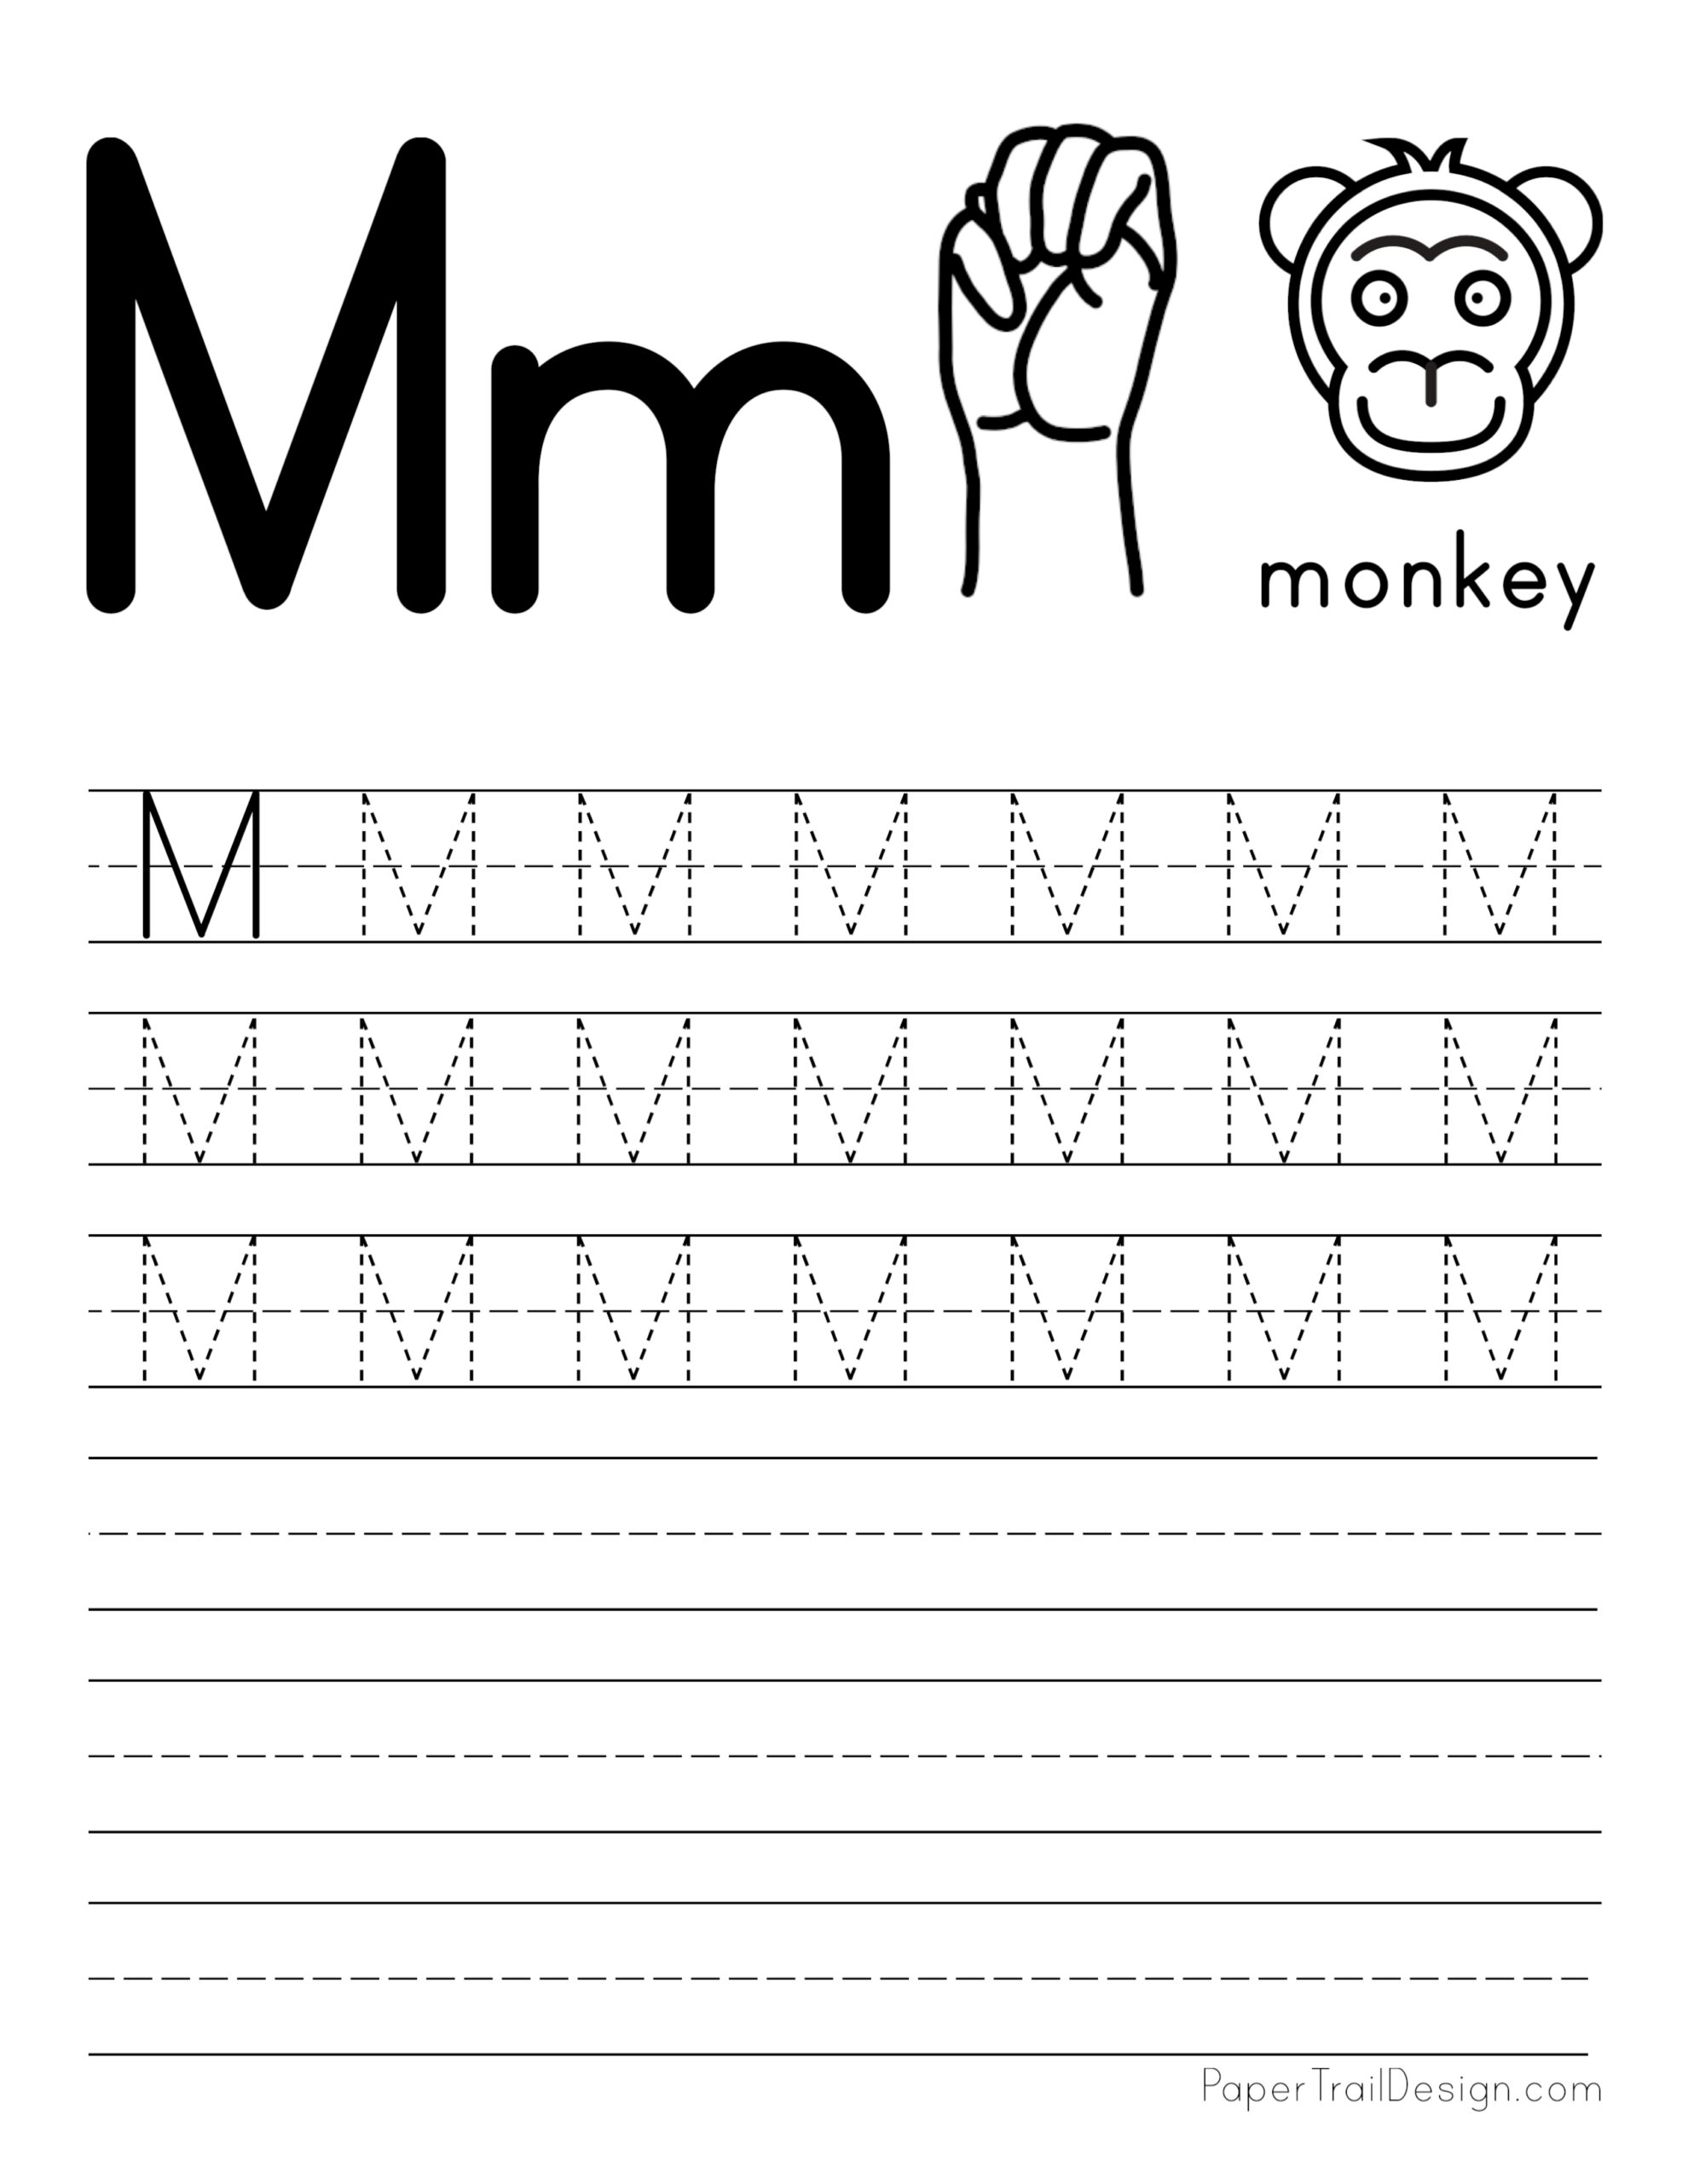 capital-letter-m-tracing-worksheet-printable-form-templates-and-letter